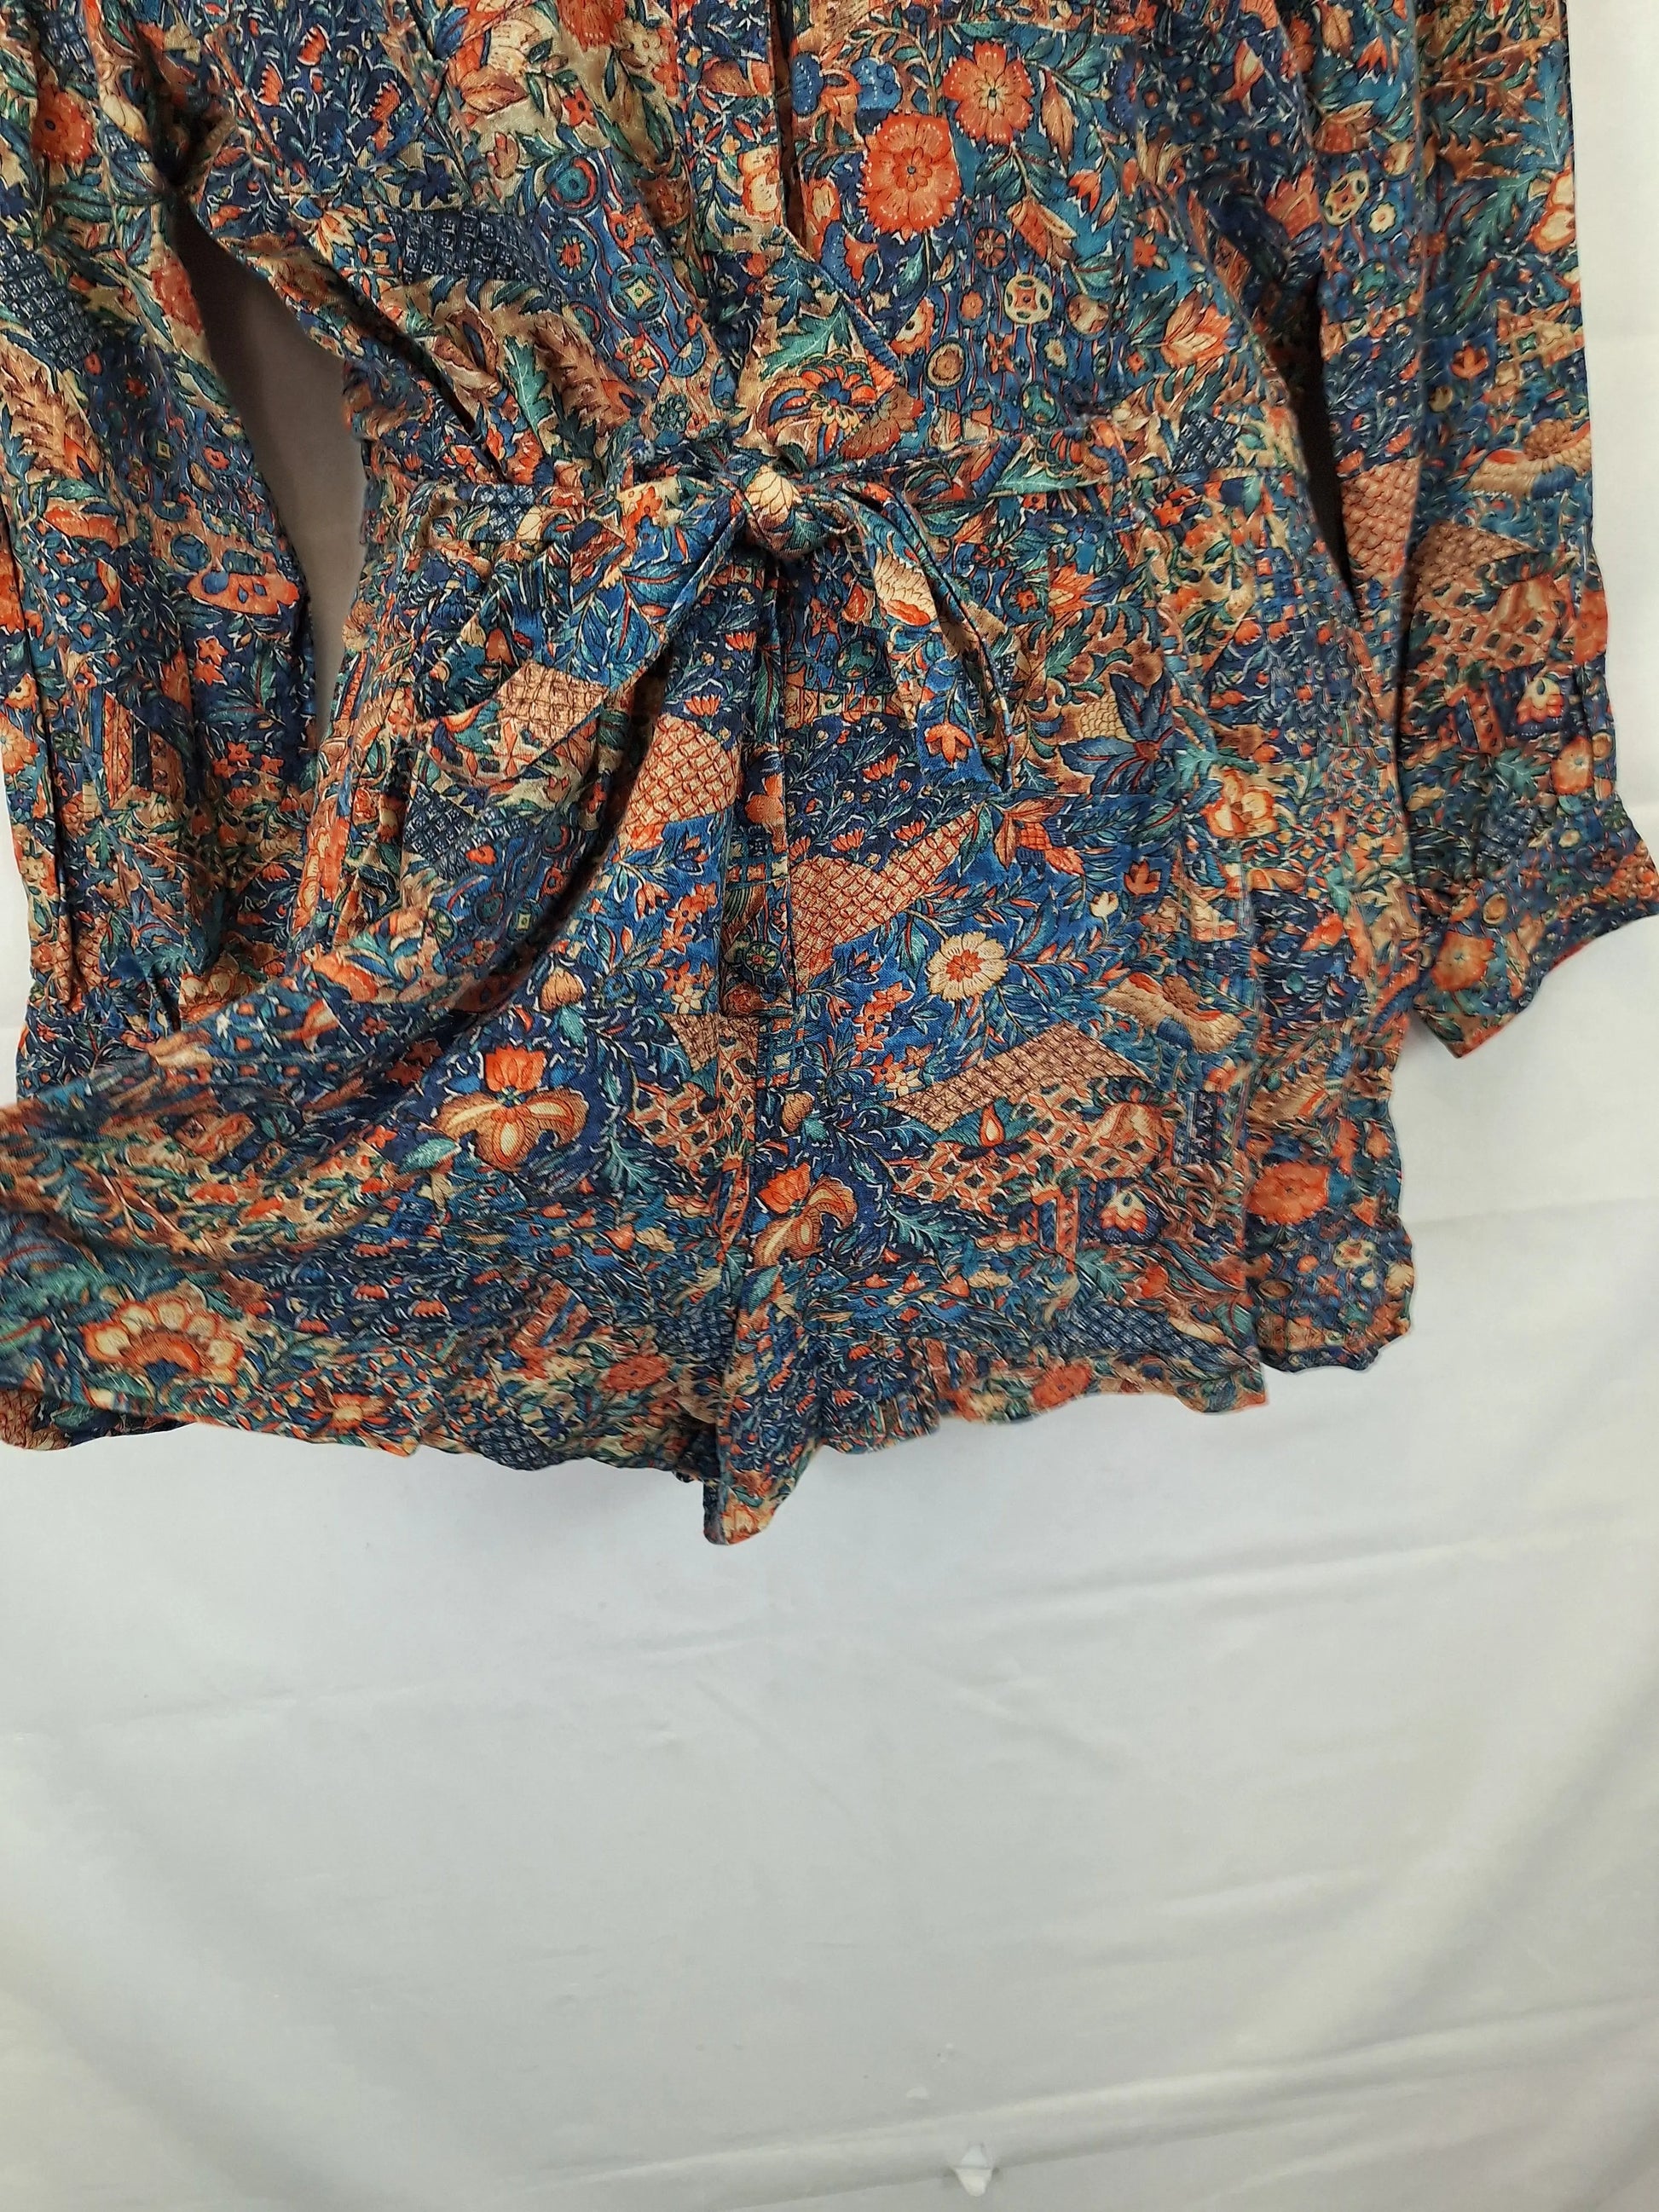 Tigerlily Boho Botanical Collared Playsuit Size 16 by SwapUp-Online Second Hand Store-Online Thrift Store